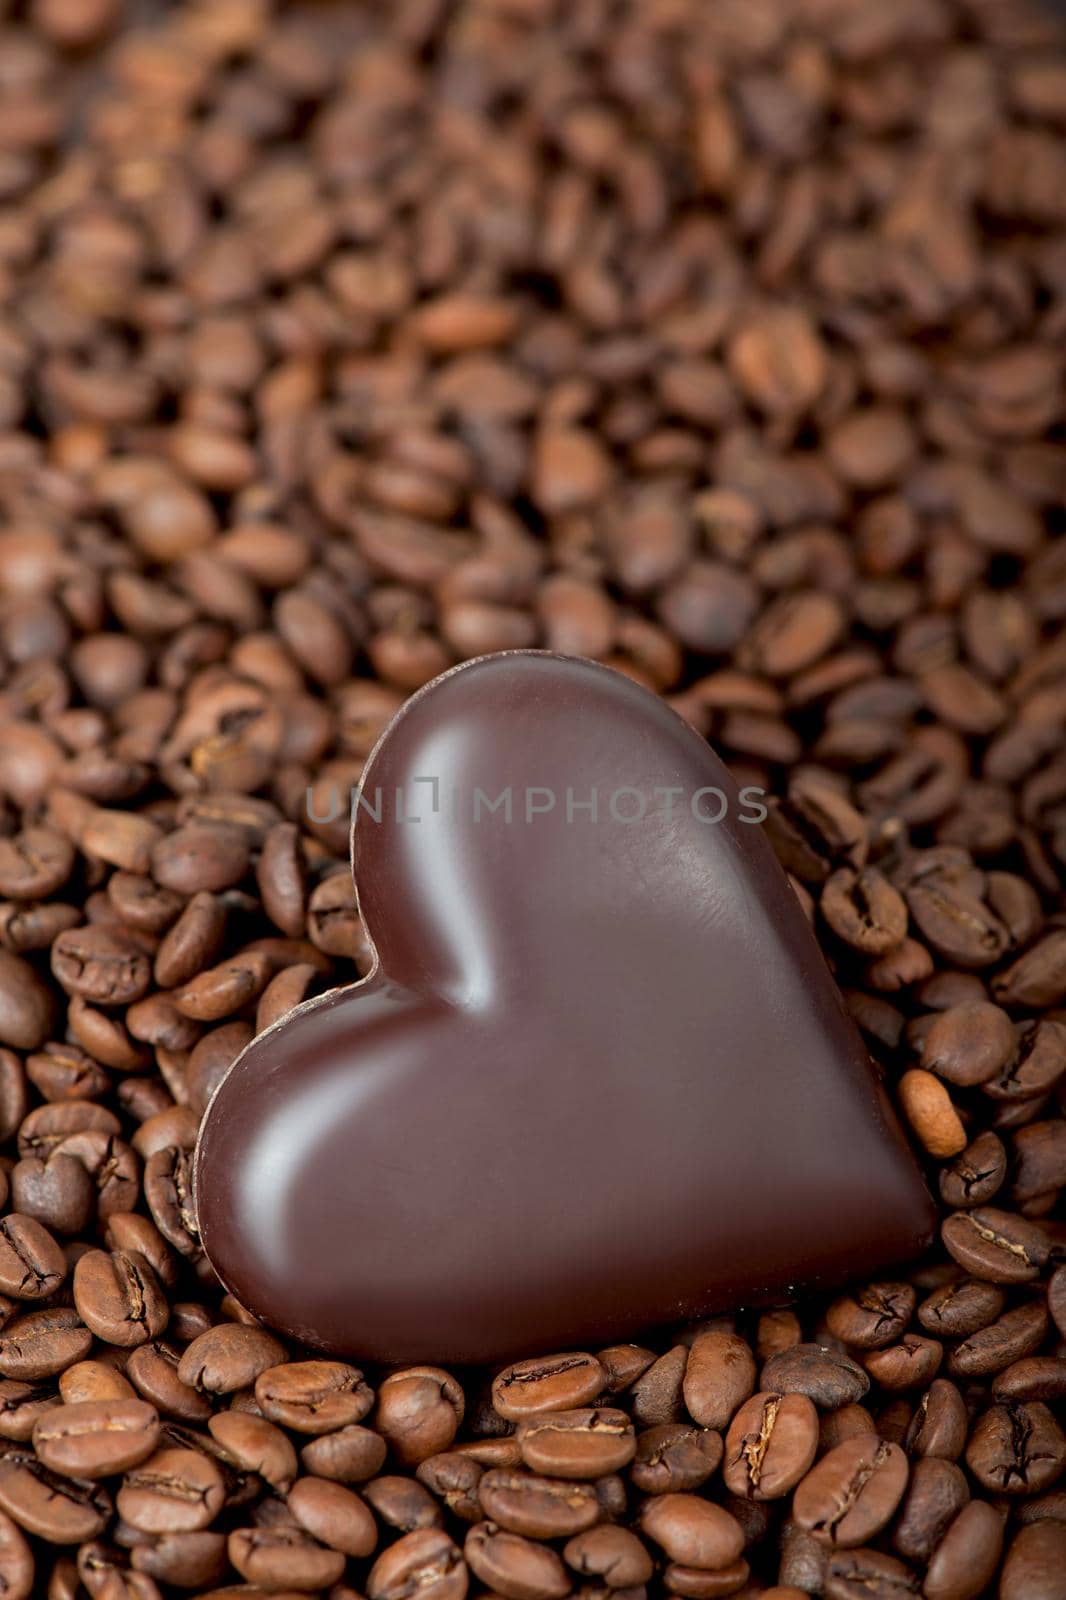 Coffee beans background and heart with heart-shaped candy by aprilphoto